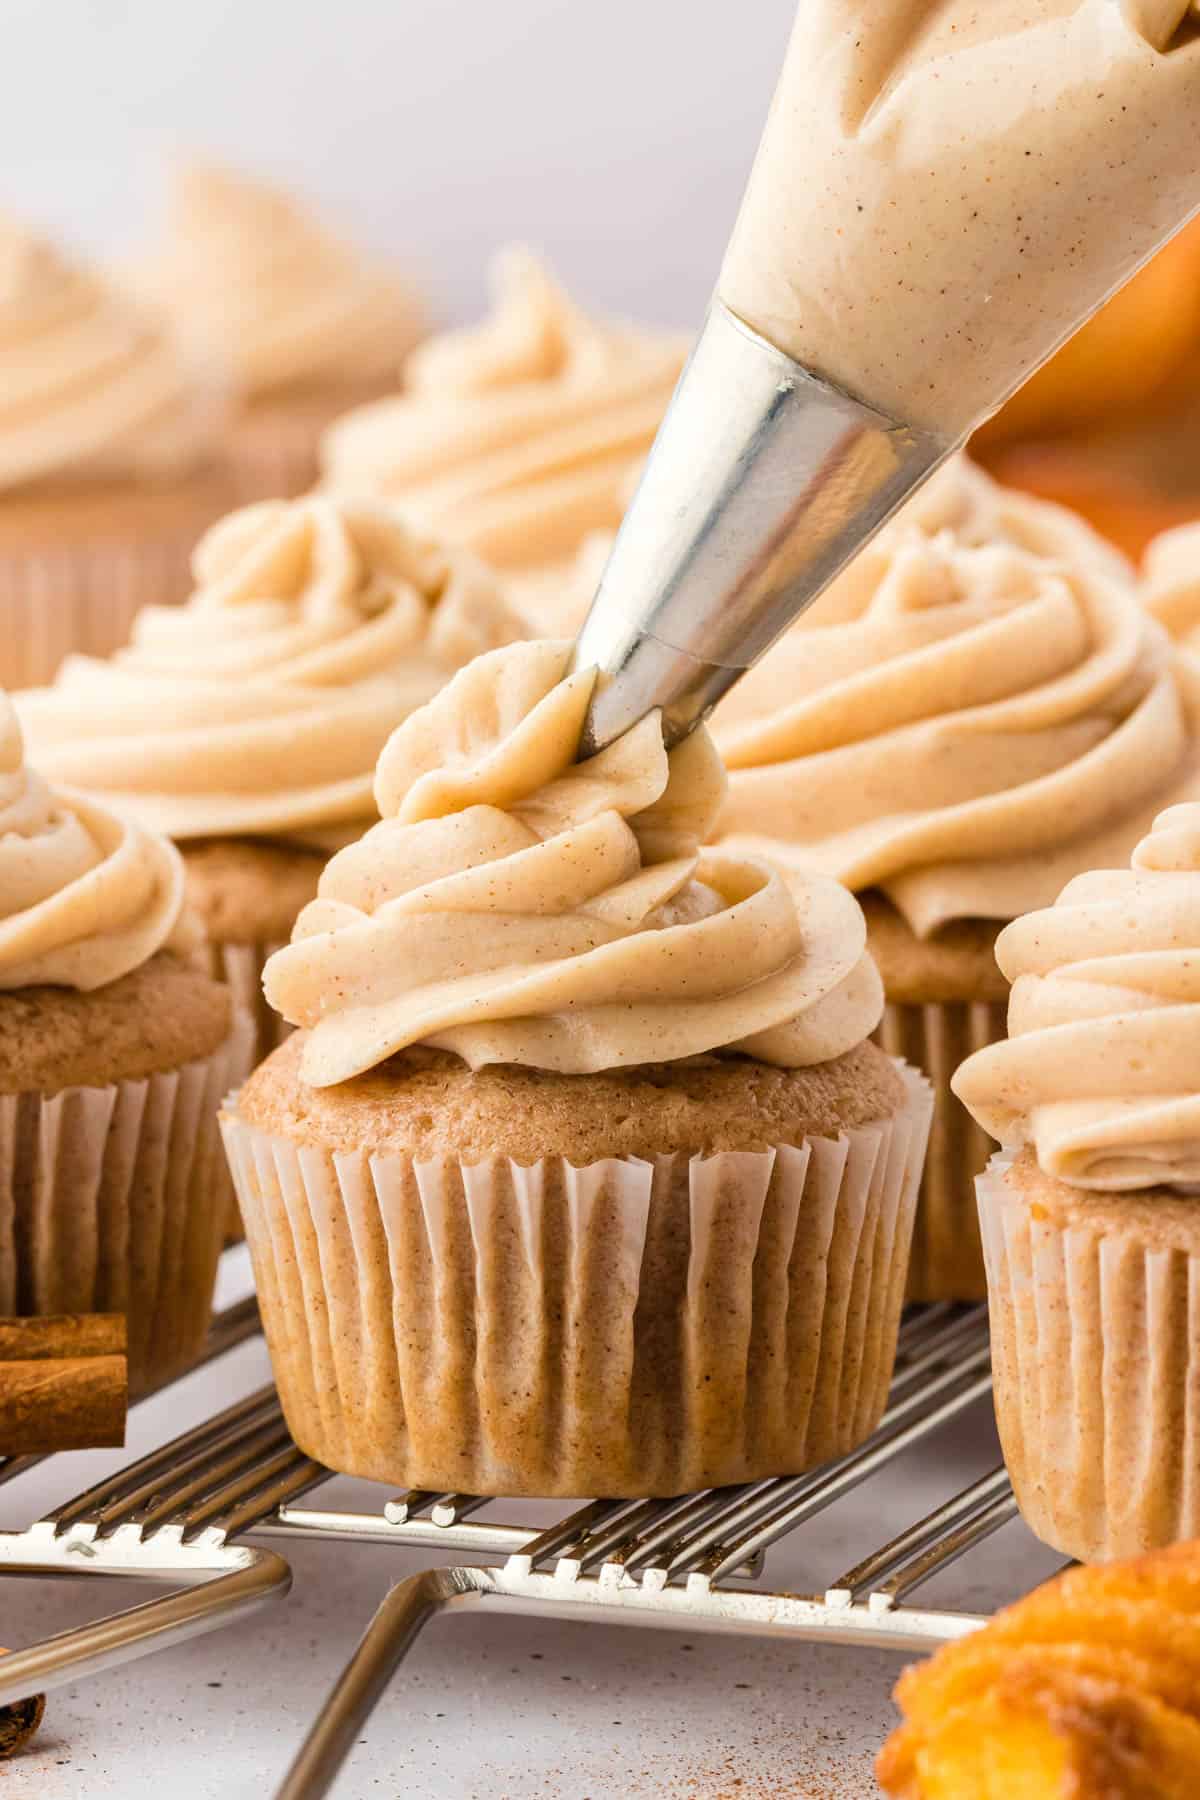 cinnamon cream cheese frosting being piped on top of a cupcake that is sitting on a wire cooling rack with more cupcakes that have already been iced